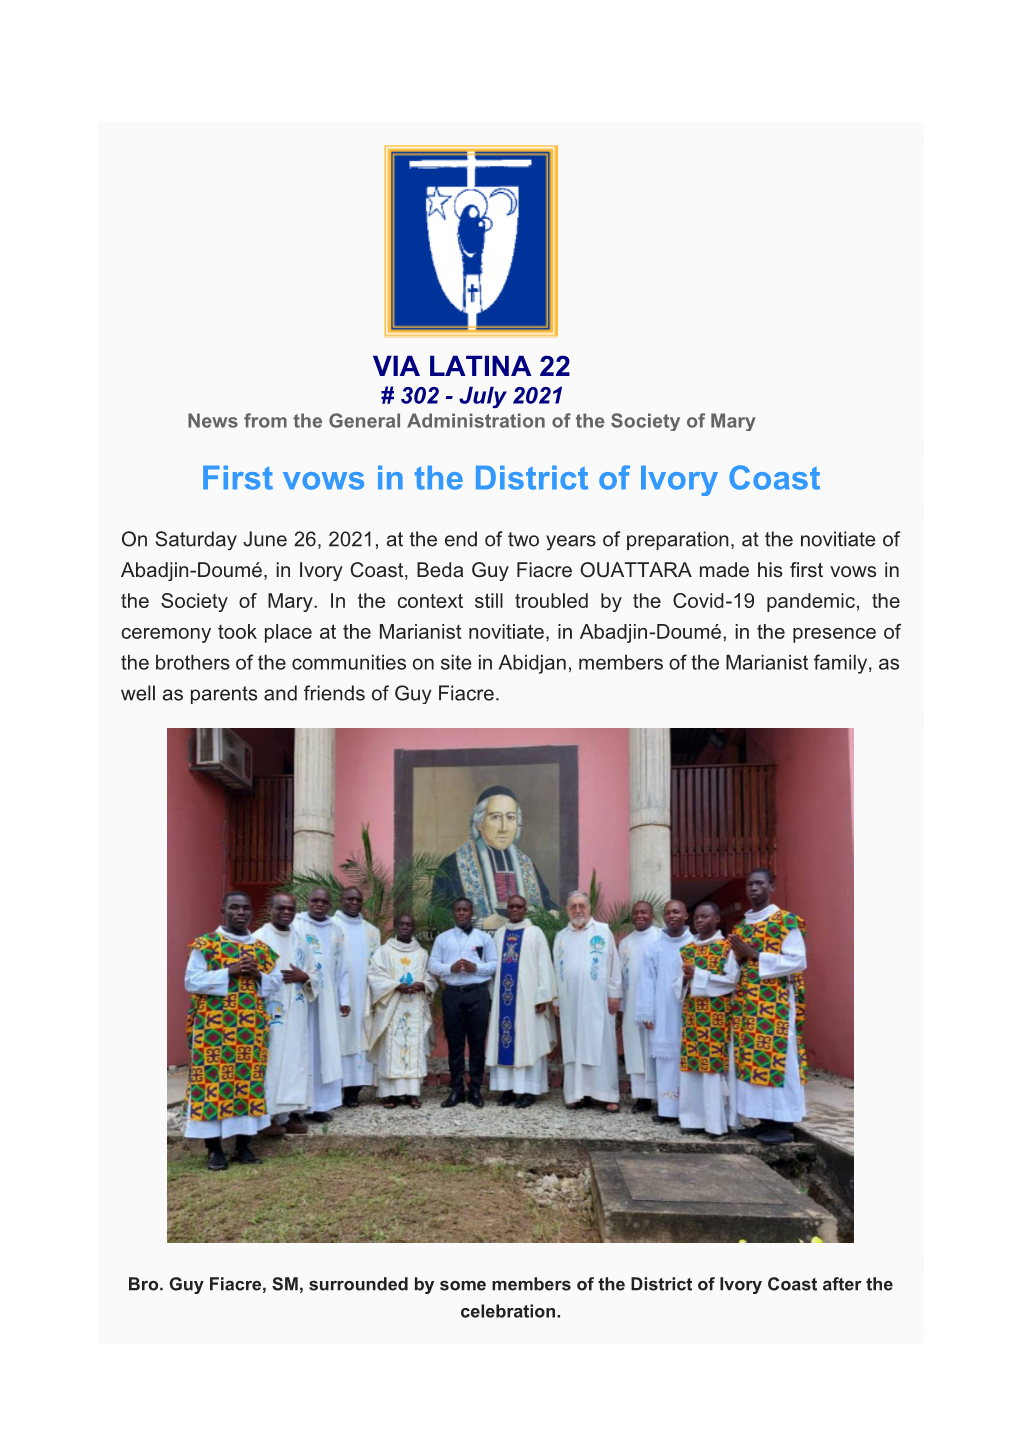 VIA LATINA 22 # 302 - July 2021 News from the General Administration of the Society of Mary First Vows in the District of Ivory Coast